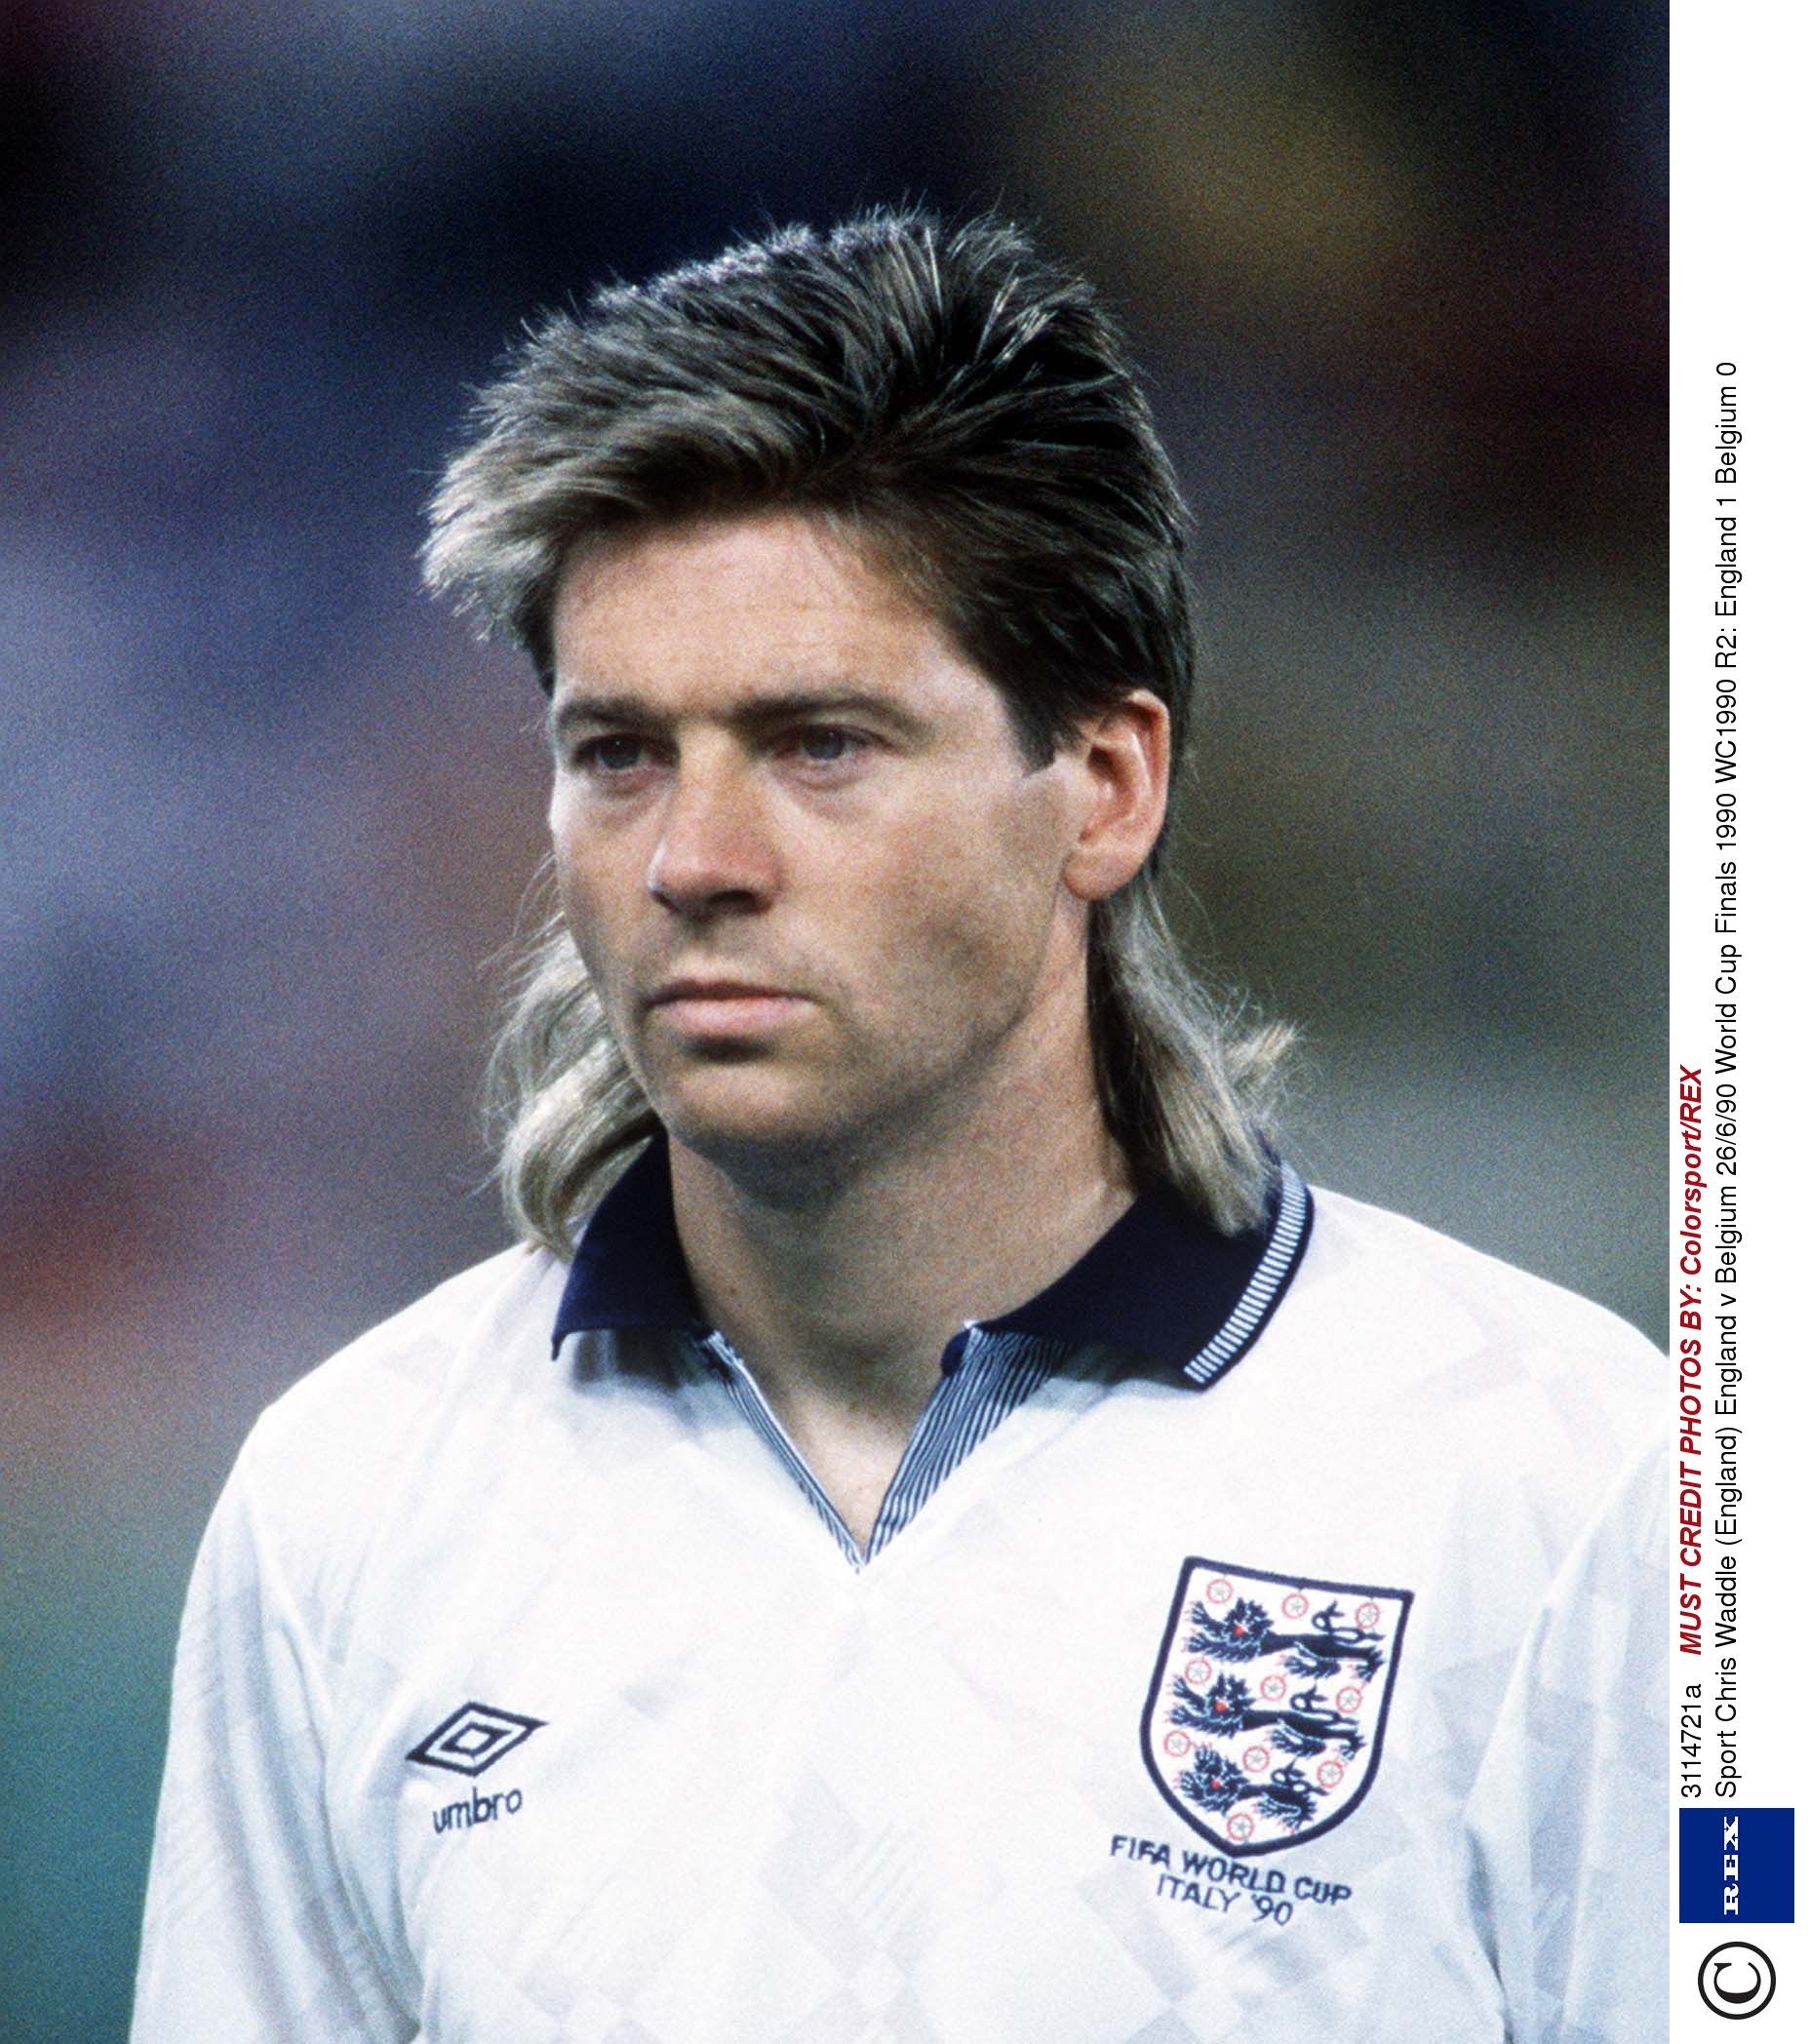 11 of the worst World Cup hairstyles